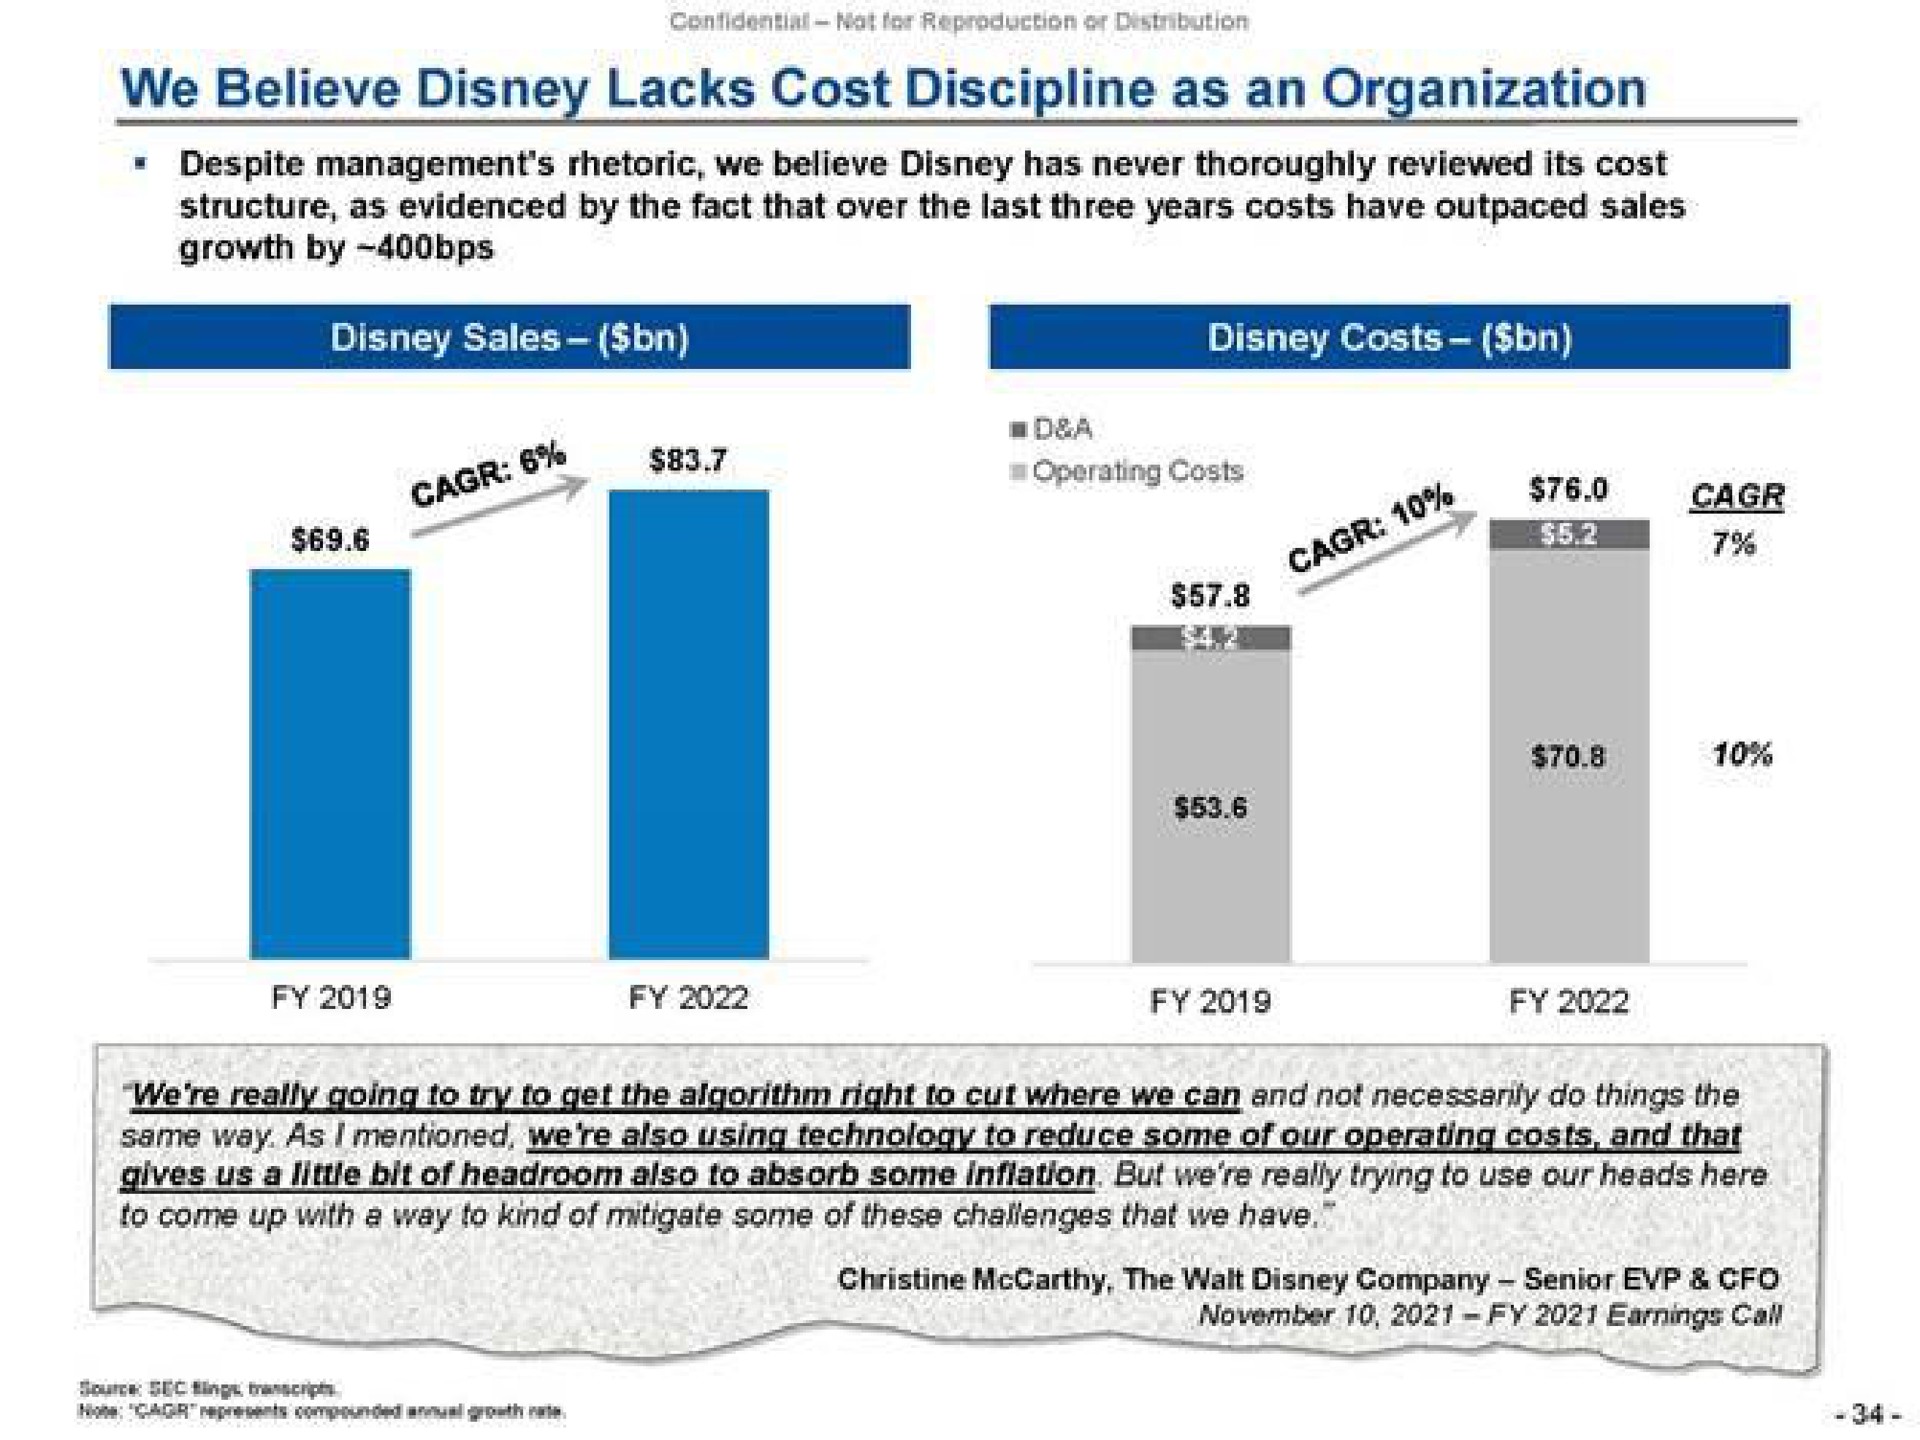 we believe lacks cost discipline as an organization growth by sales costs i also to absorb come up with a way kind of mitigate some of these challenges that we have us a little bit of head inflation but we aly use our hers | Trian Partners